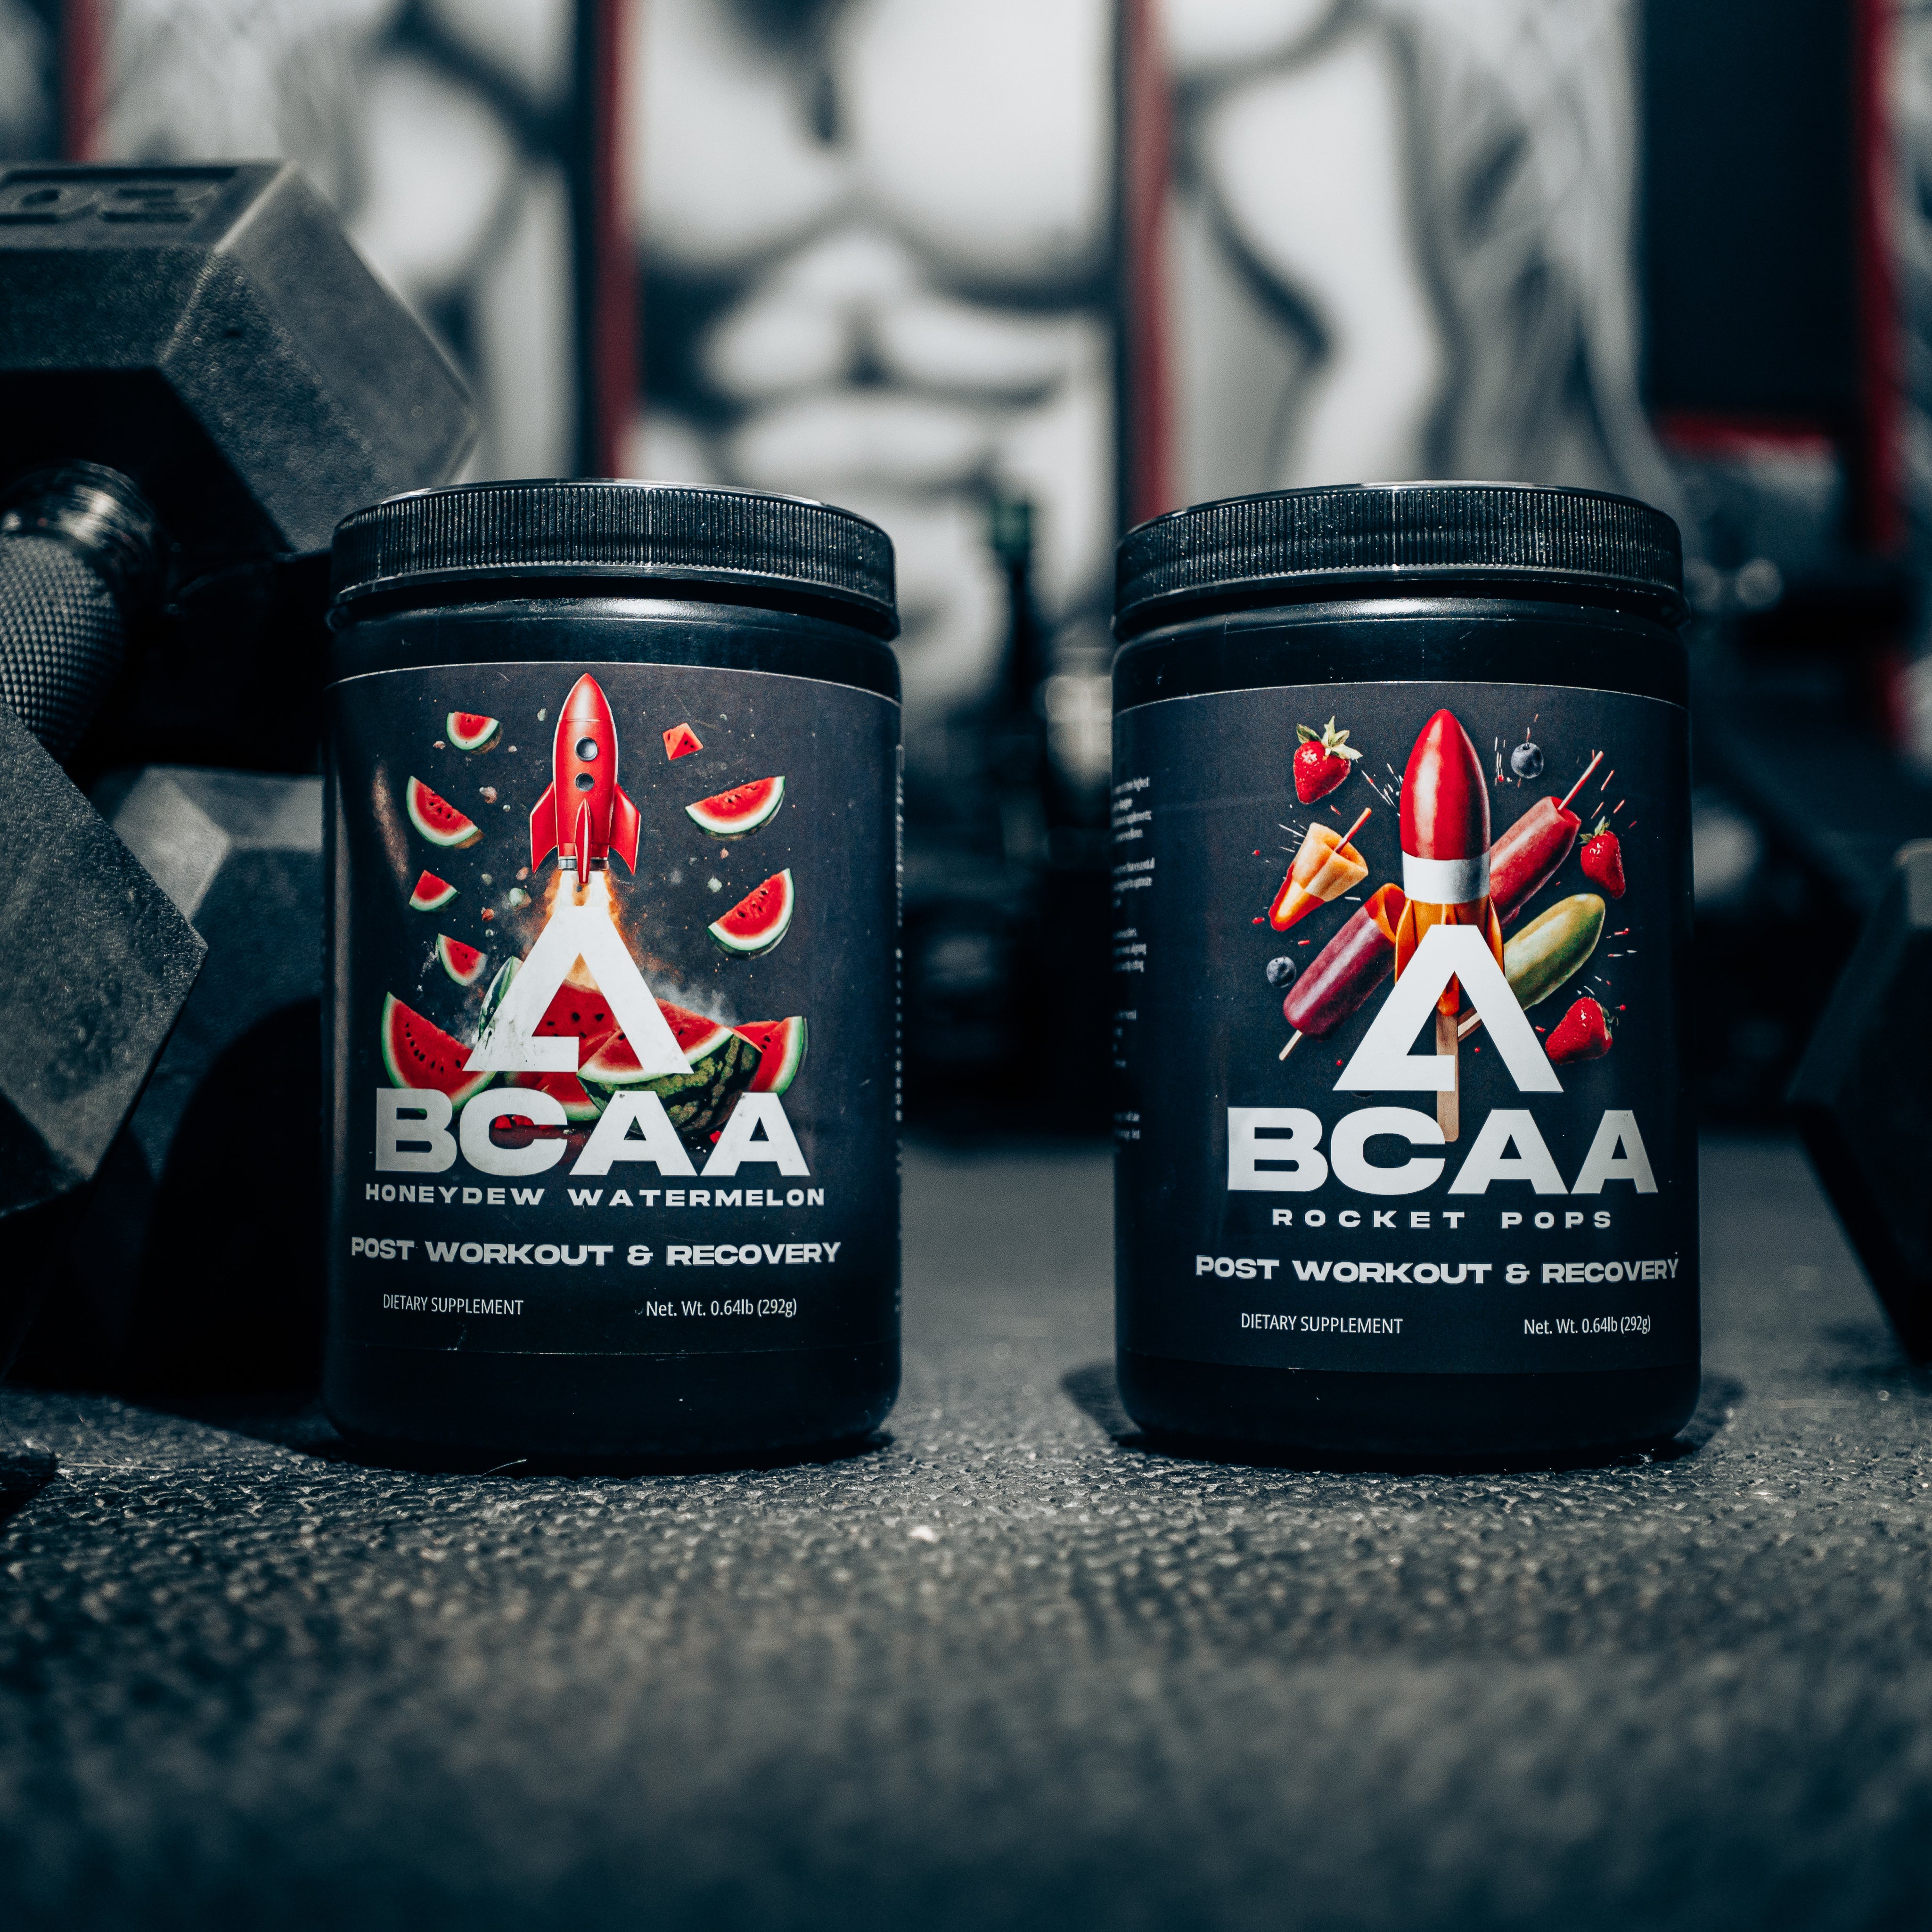 BCAA's 2:1:1 Muscle Recovery and Endurance